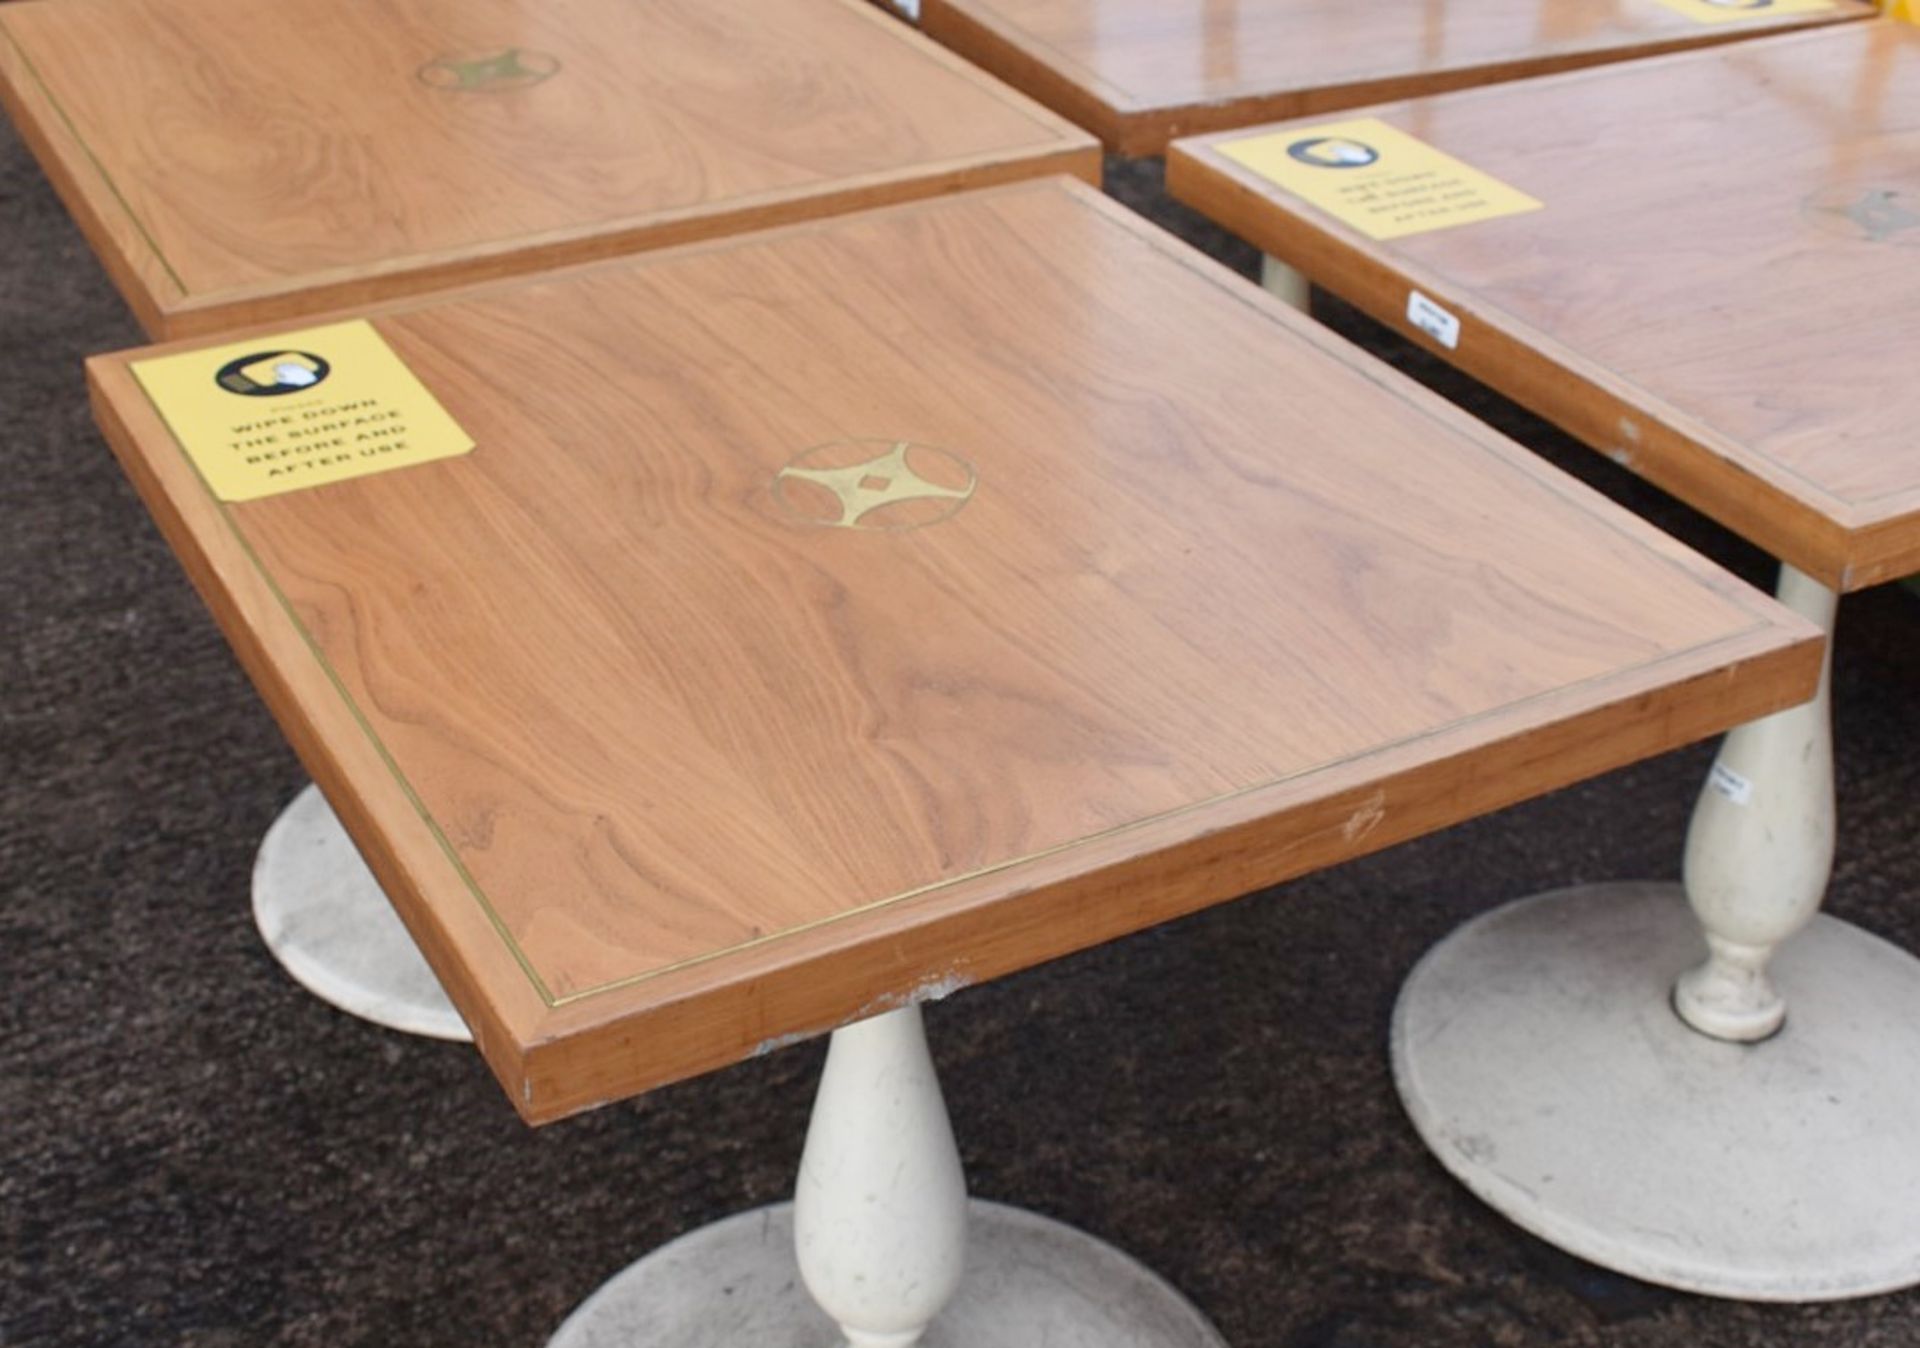 4 x Wooden Topped Bistro Tables Featuring Inlaid Brass Work And Sturdy Metal Bases - Recently - Image 7 of 7